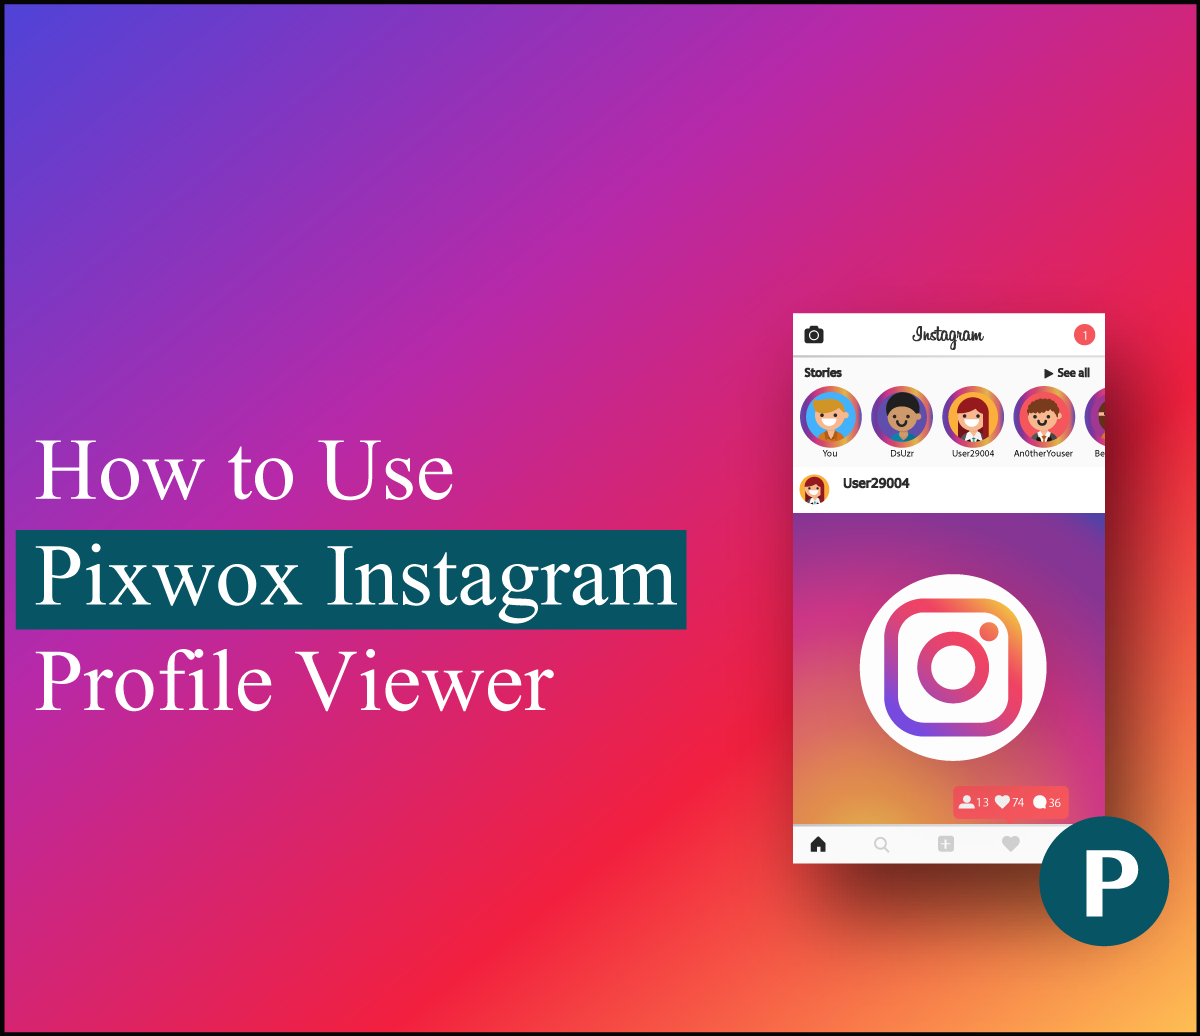 How to Use Pixwox Instagram Profile Viewer?